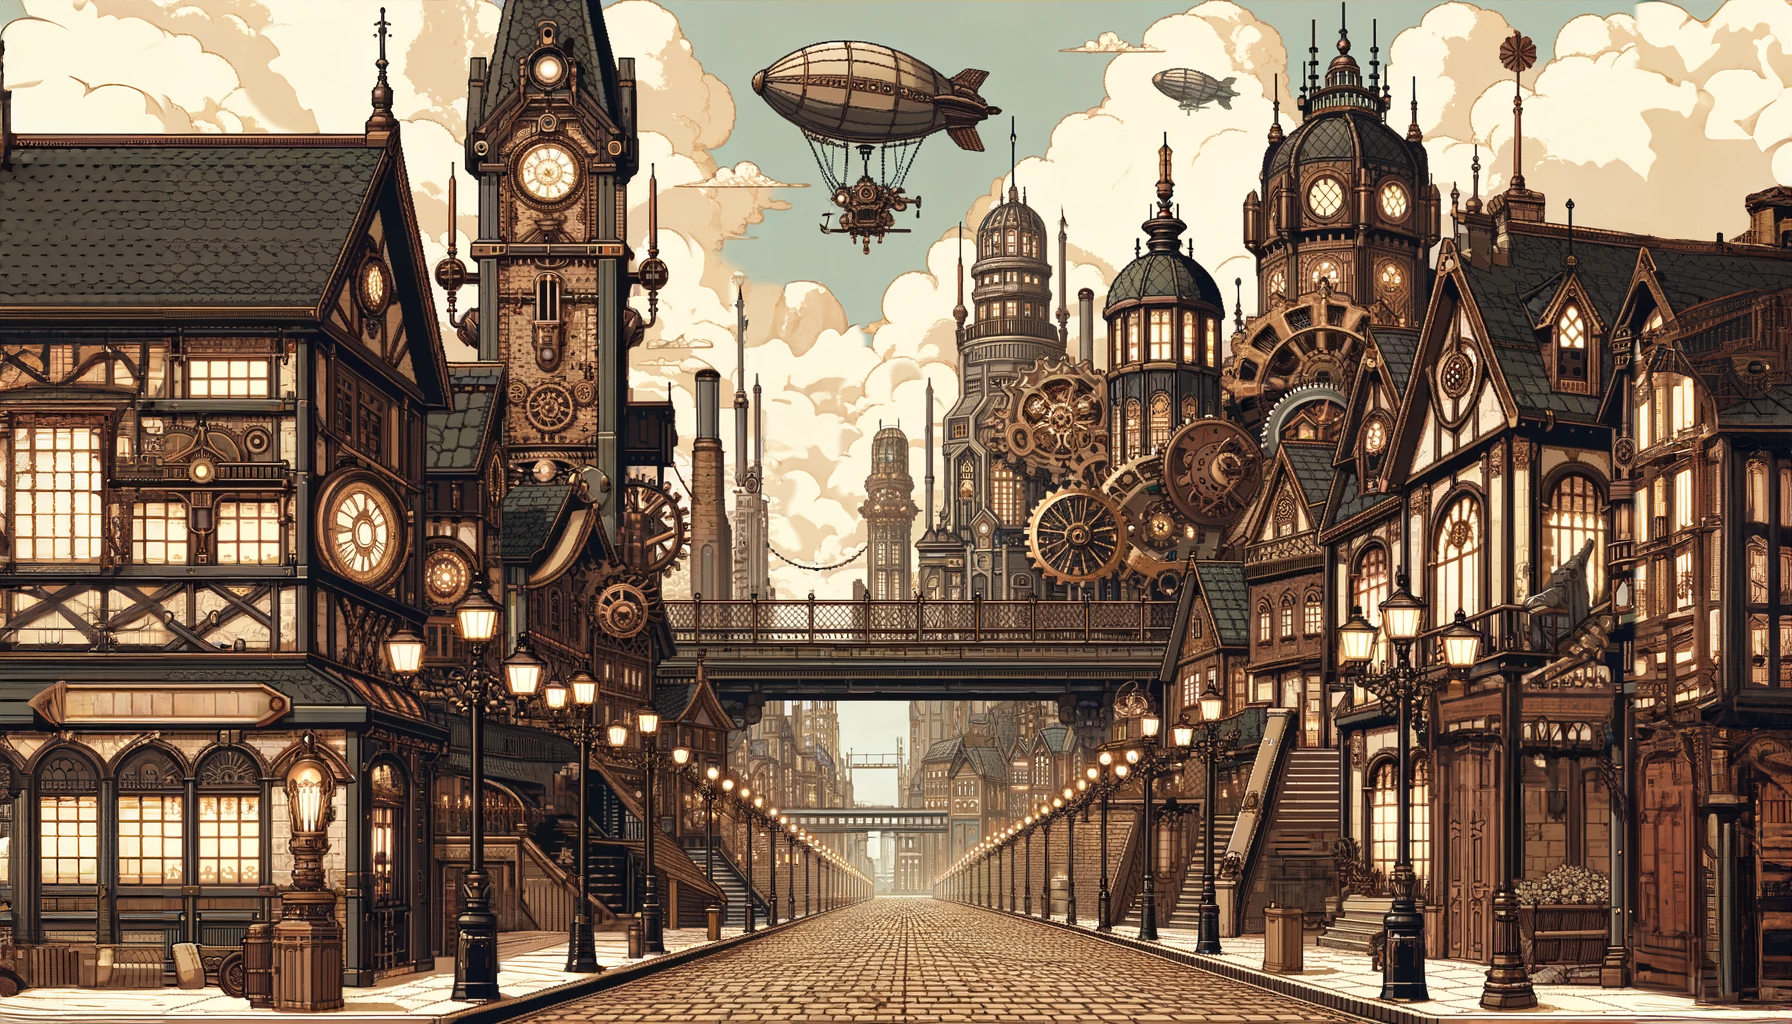 Free Background illustrations of a Steampunk City